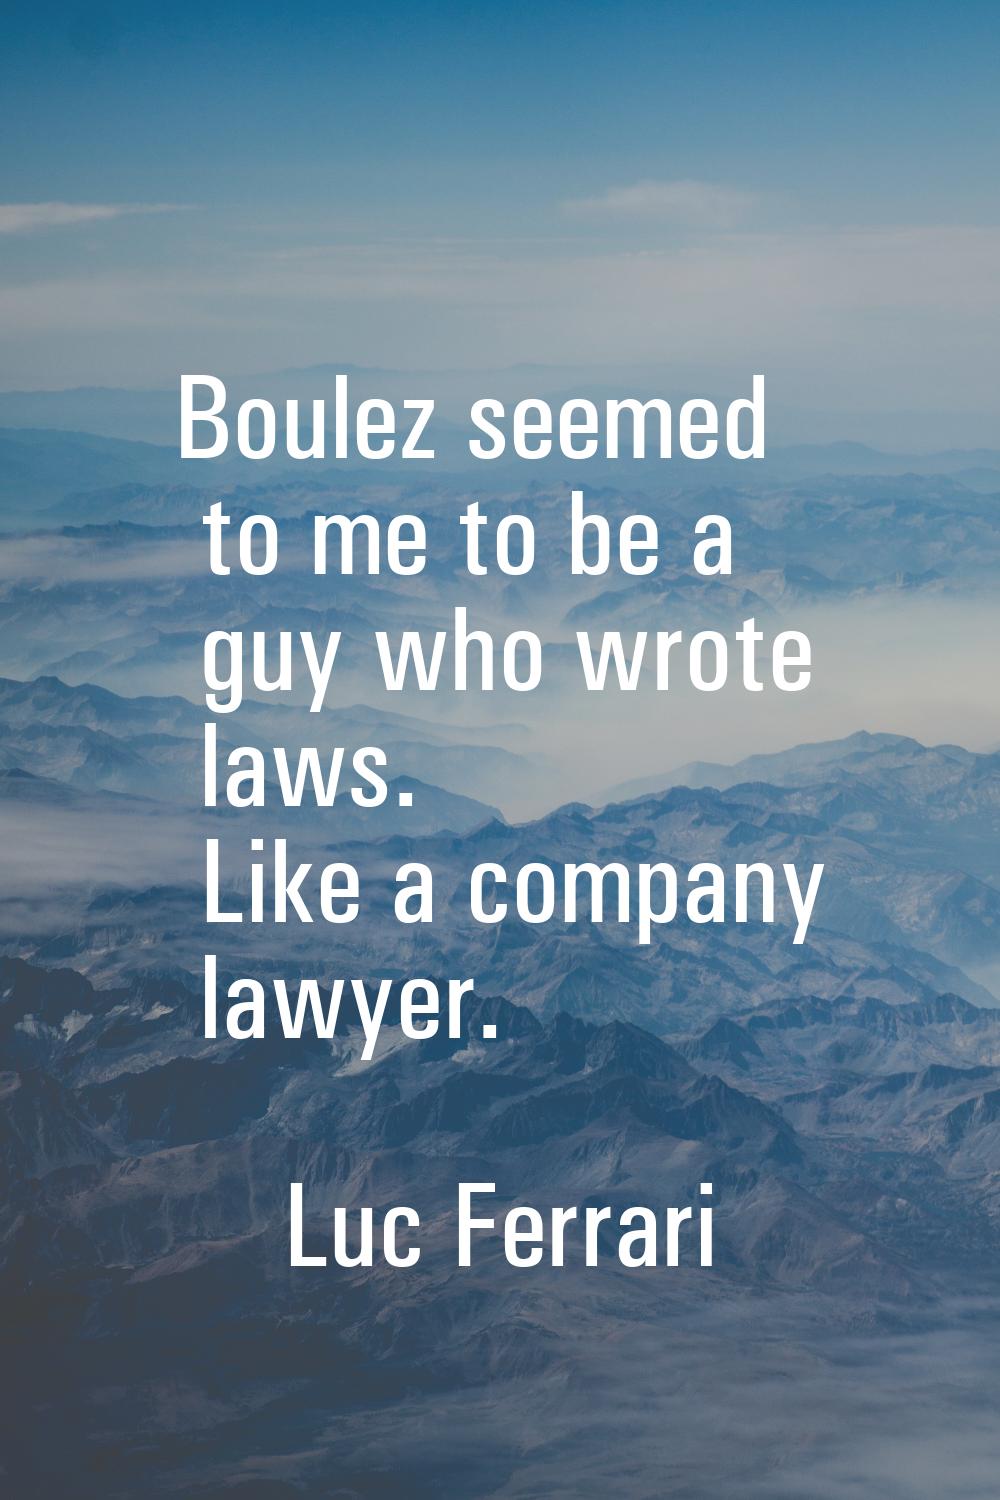 Boulez seemed to me to be a guy who wrote laws. Like a company lawyer.